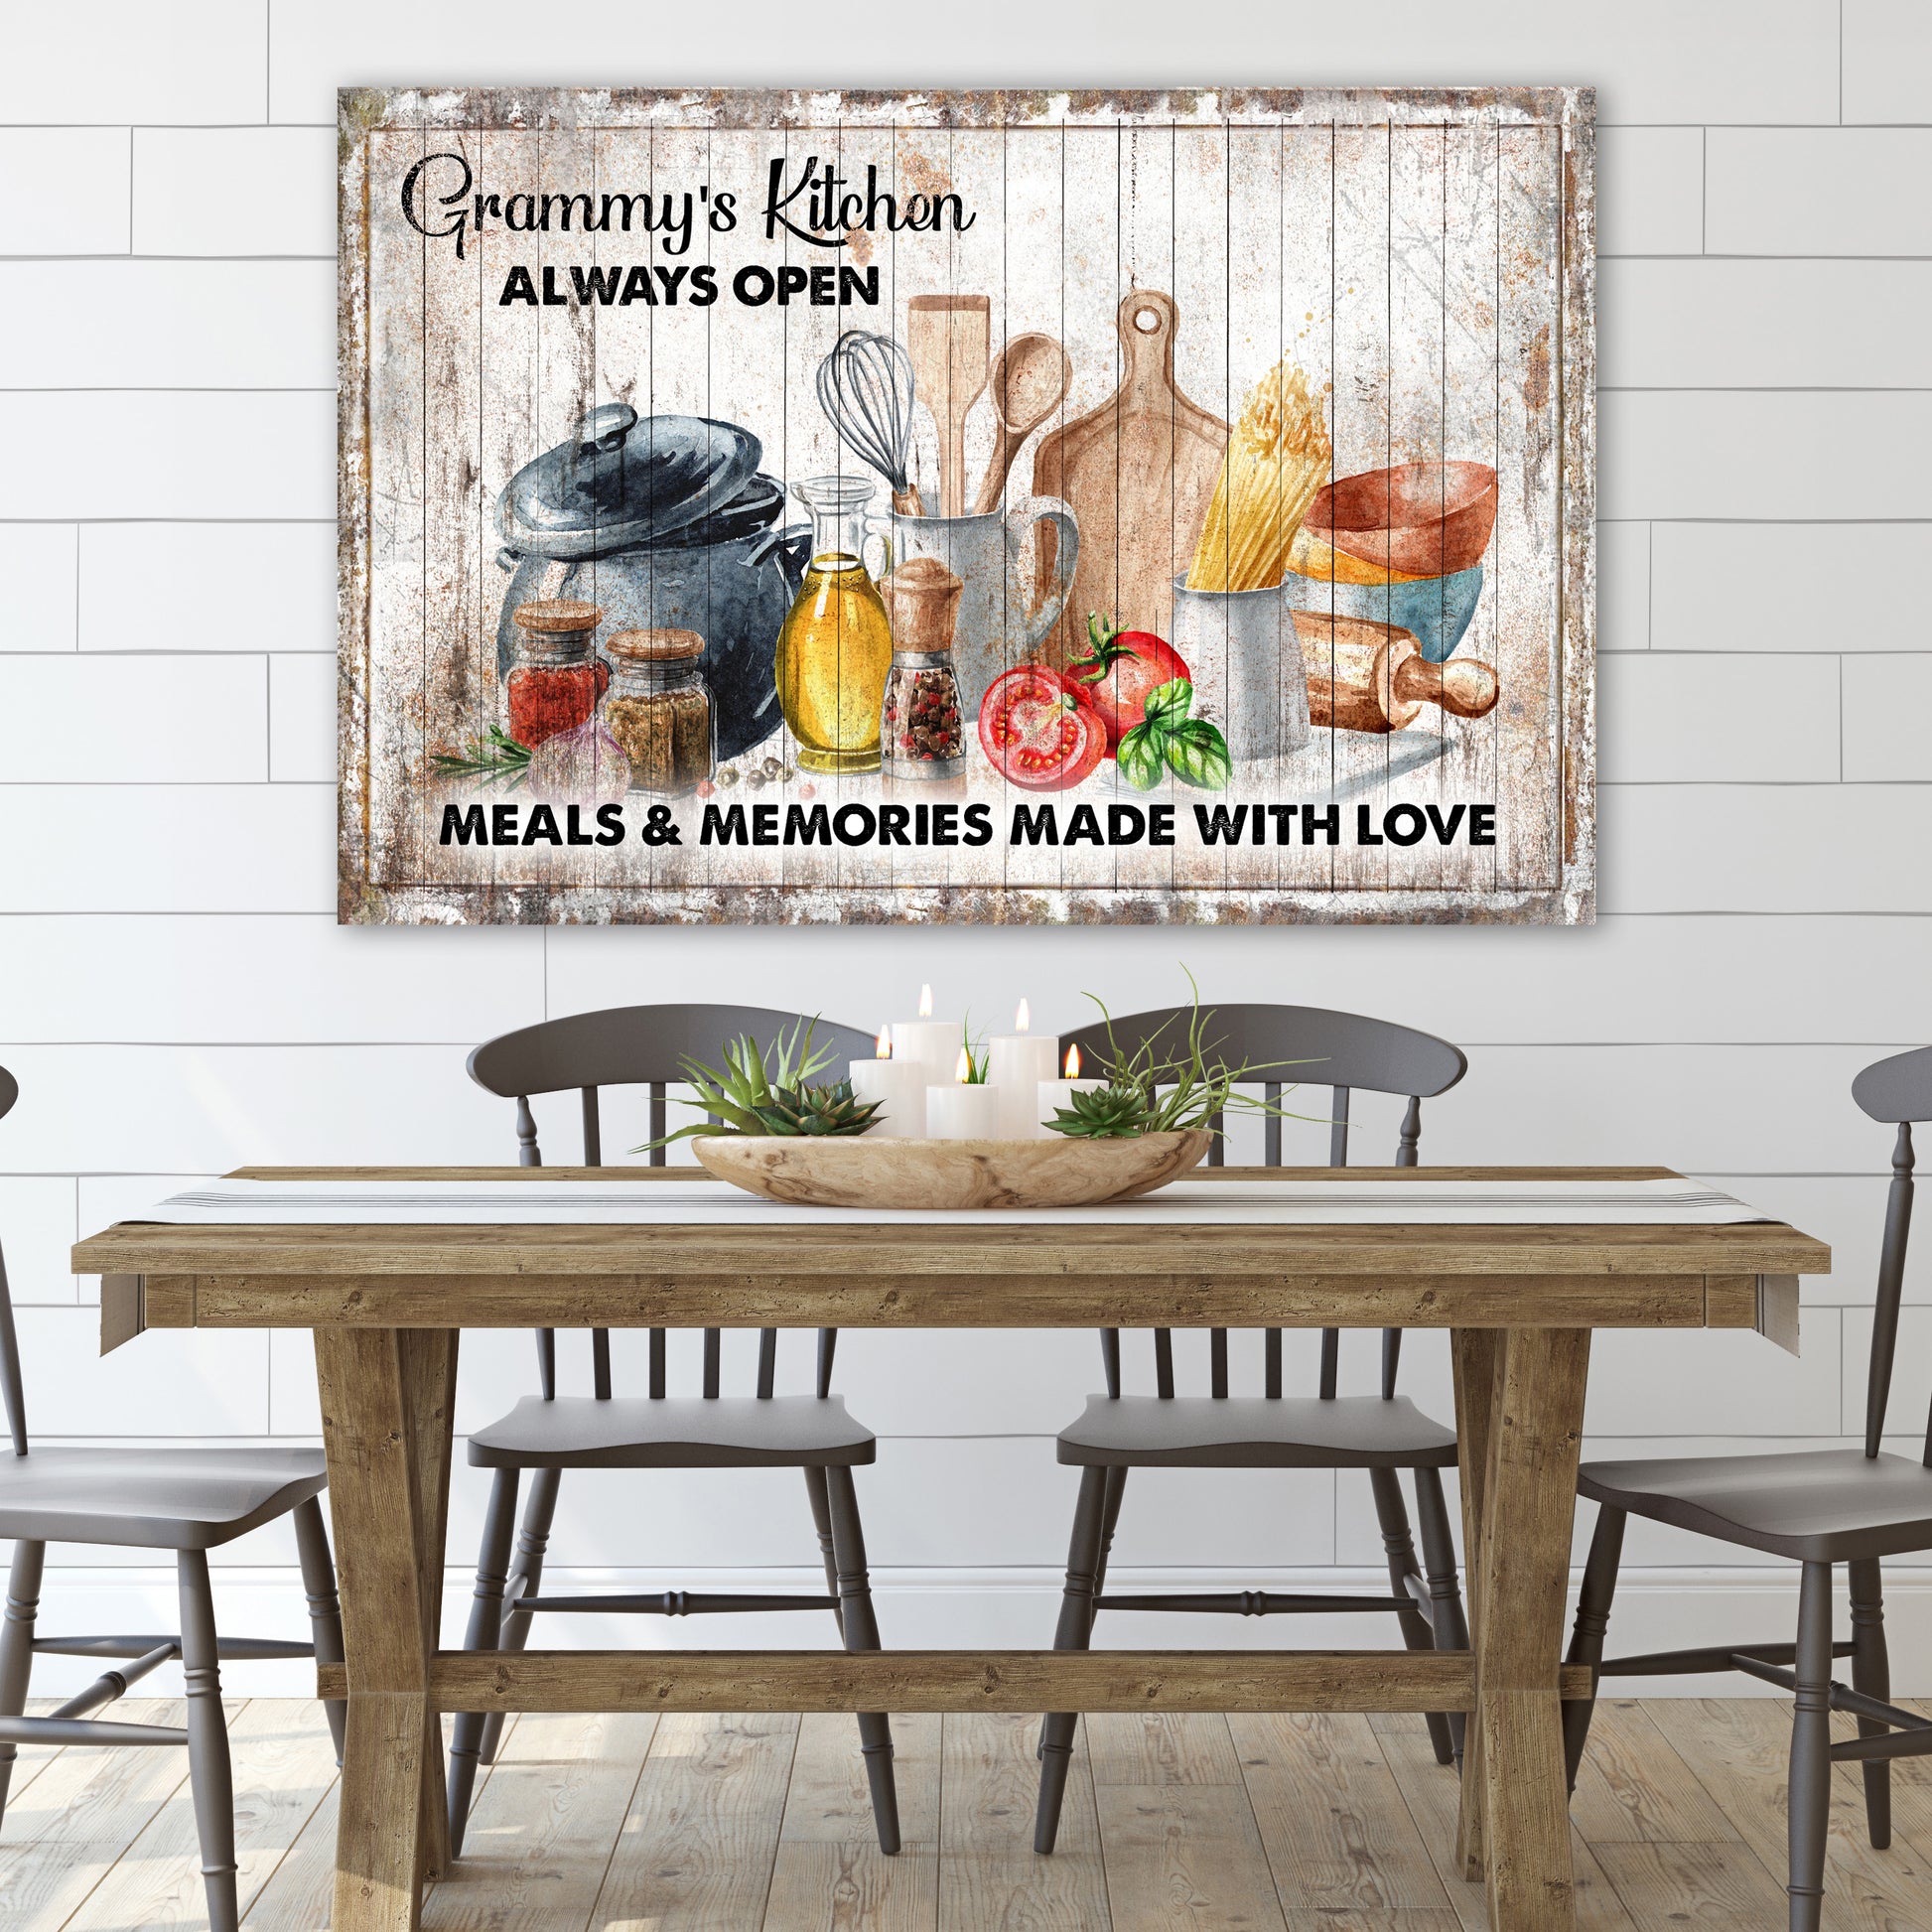 Meals and Memories made with love. Always Open Kitchen Canvas - Image by Tailored Canvases